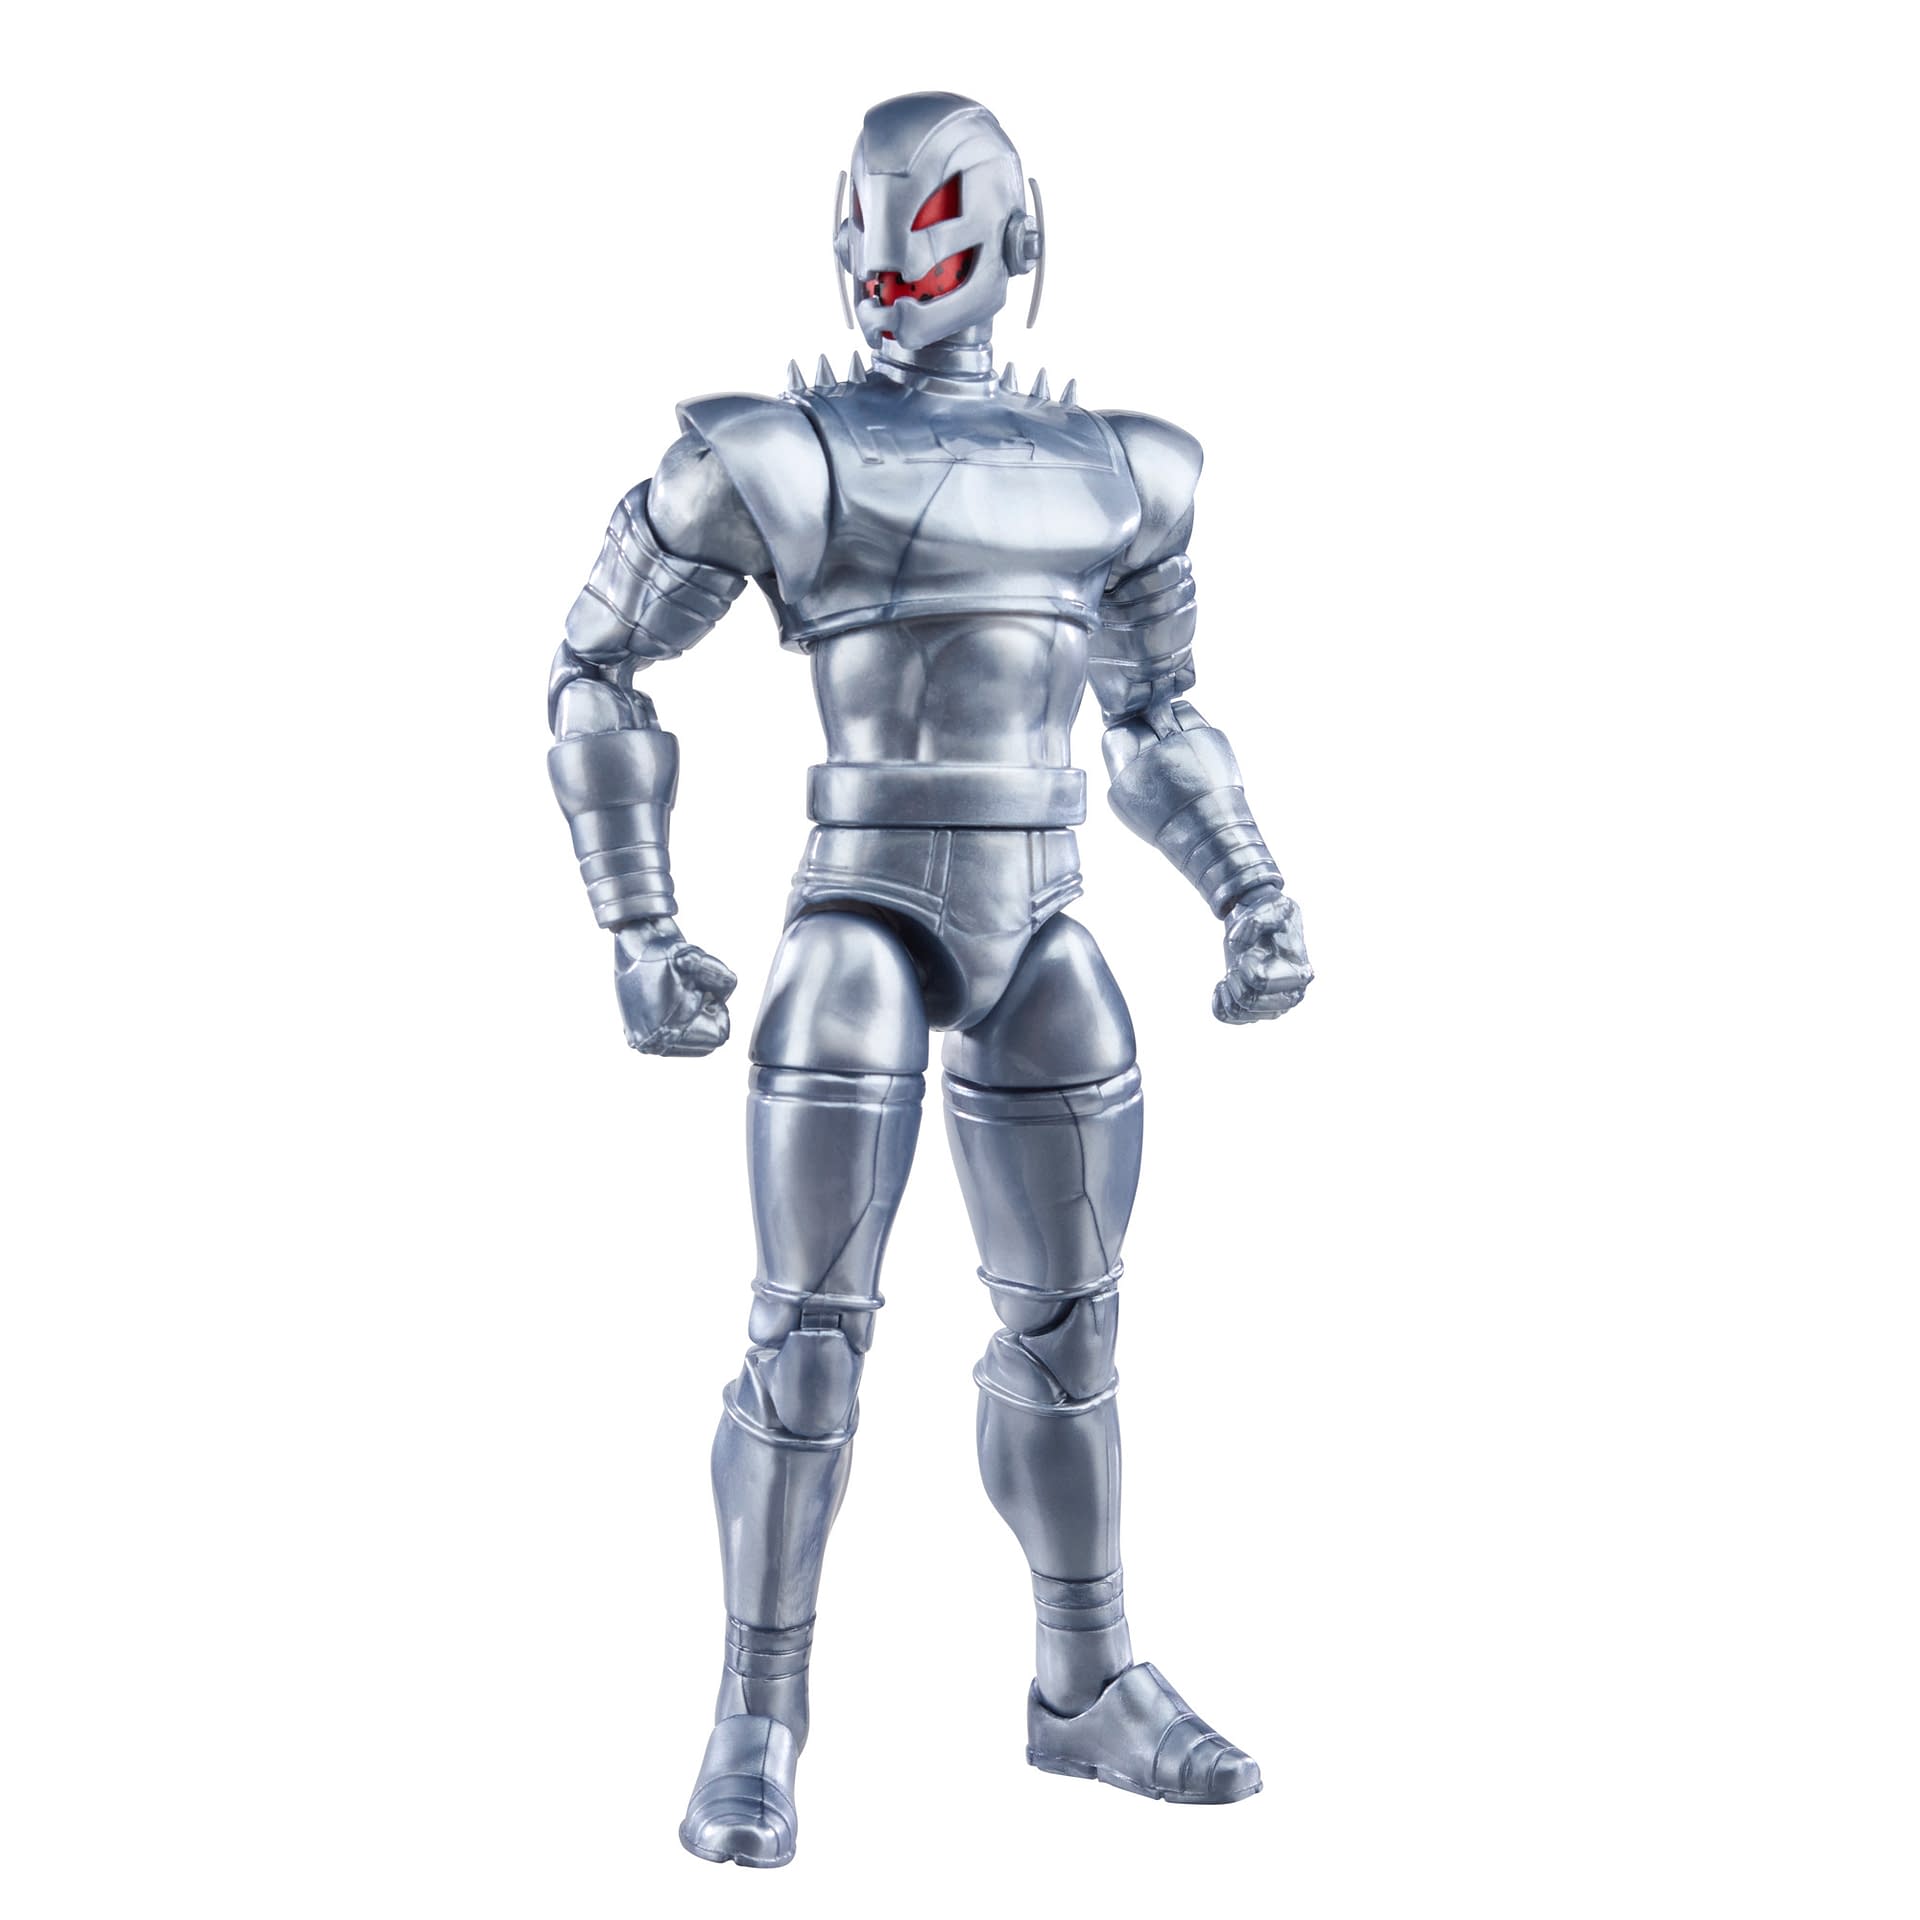 Ultron is Back Wants Revenge with Hasbro's Newets Marvel Legends 